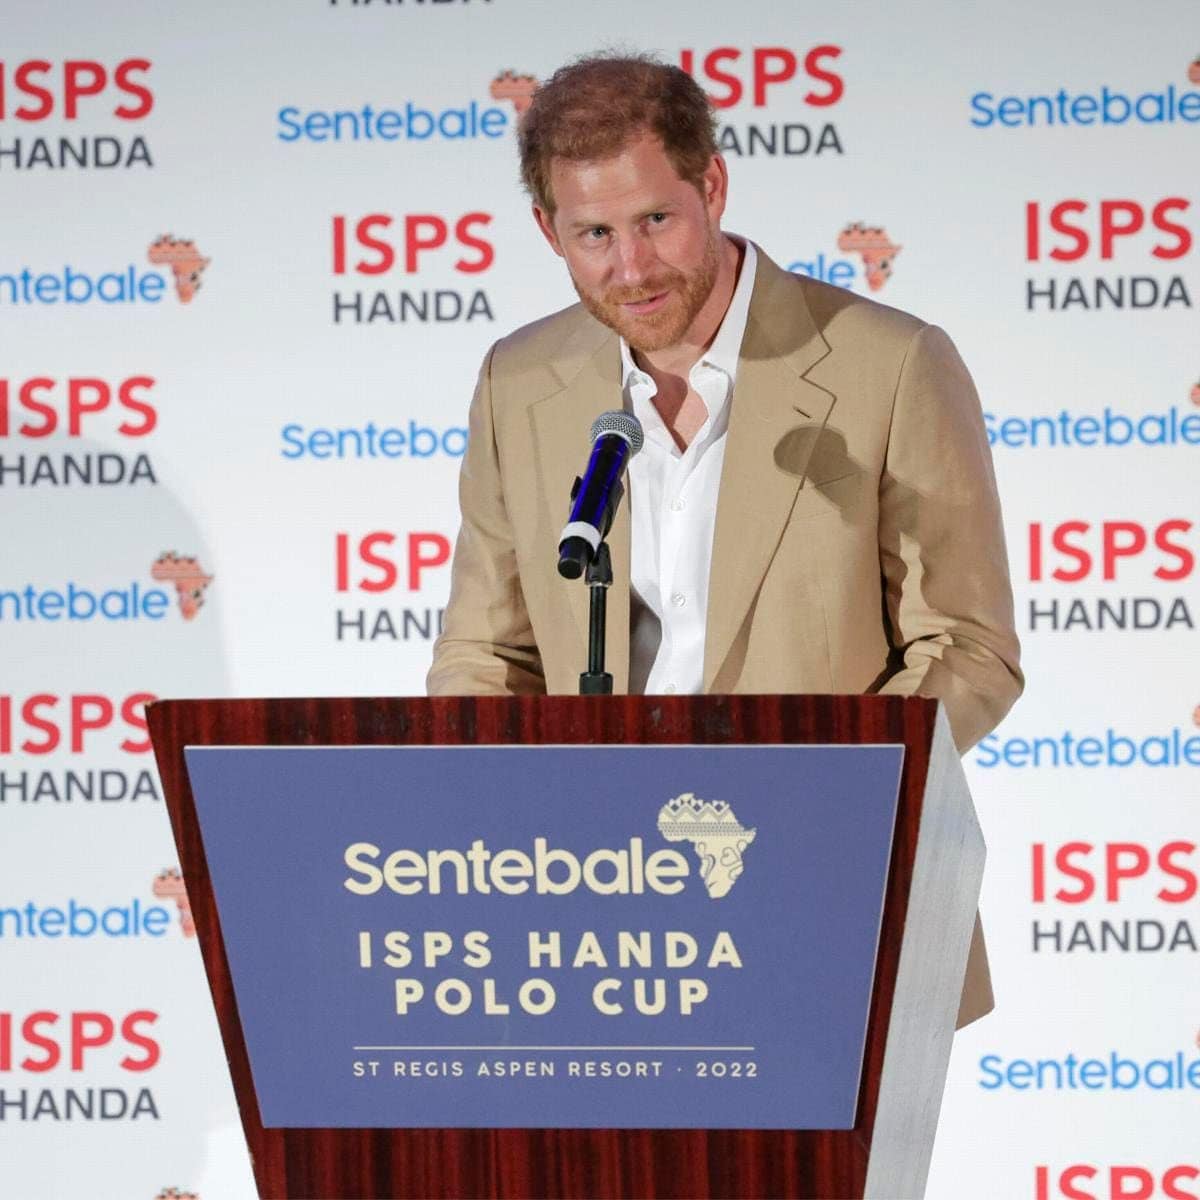 Prince Harry traveled to Aspen, Colorado to play in the 2022 Sentebale ISPS Handa Polo Cup